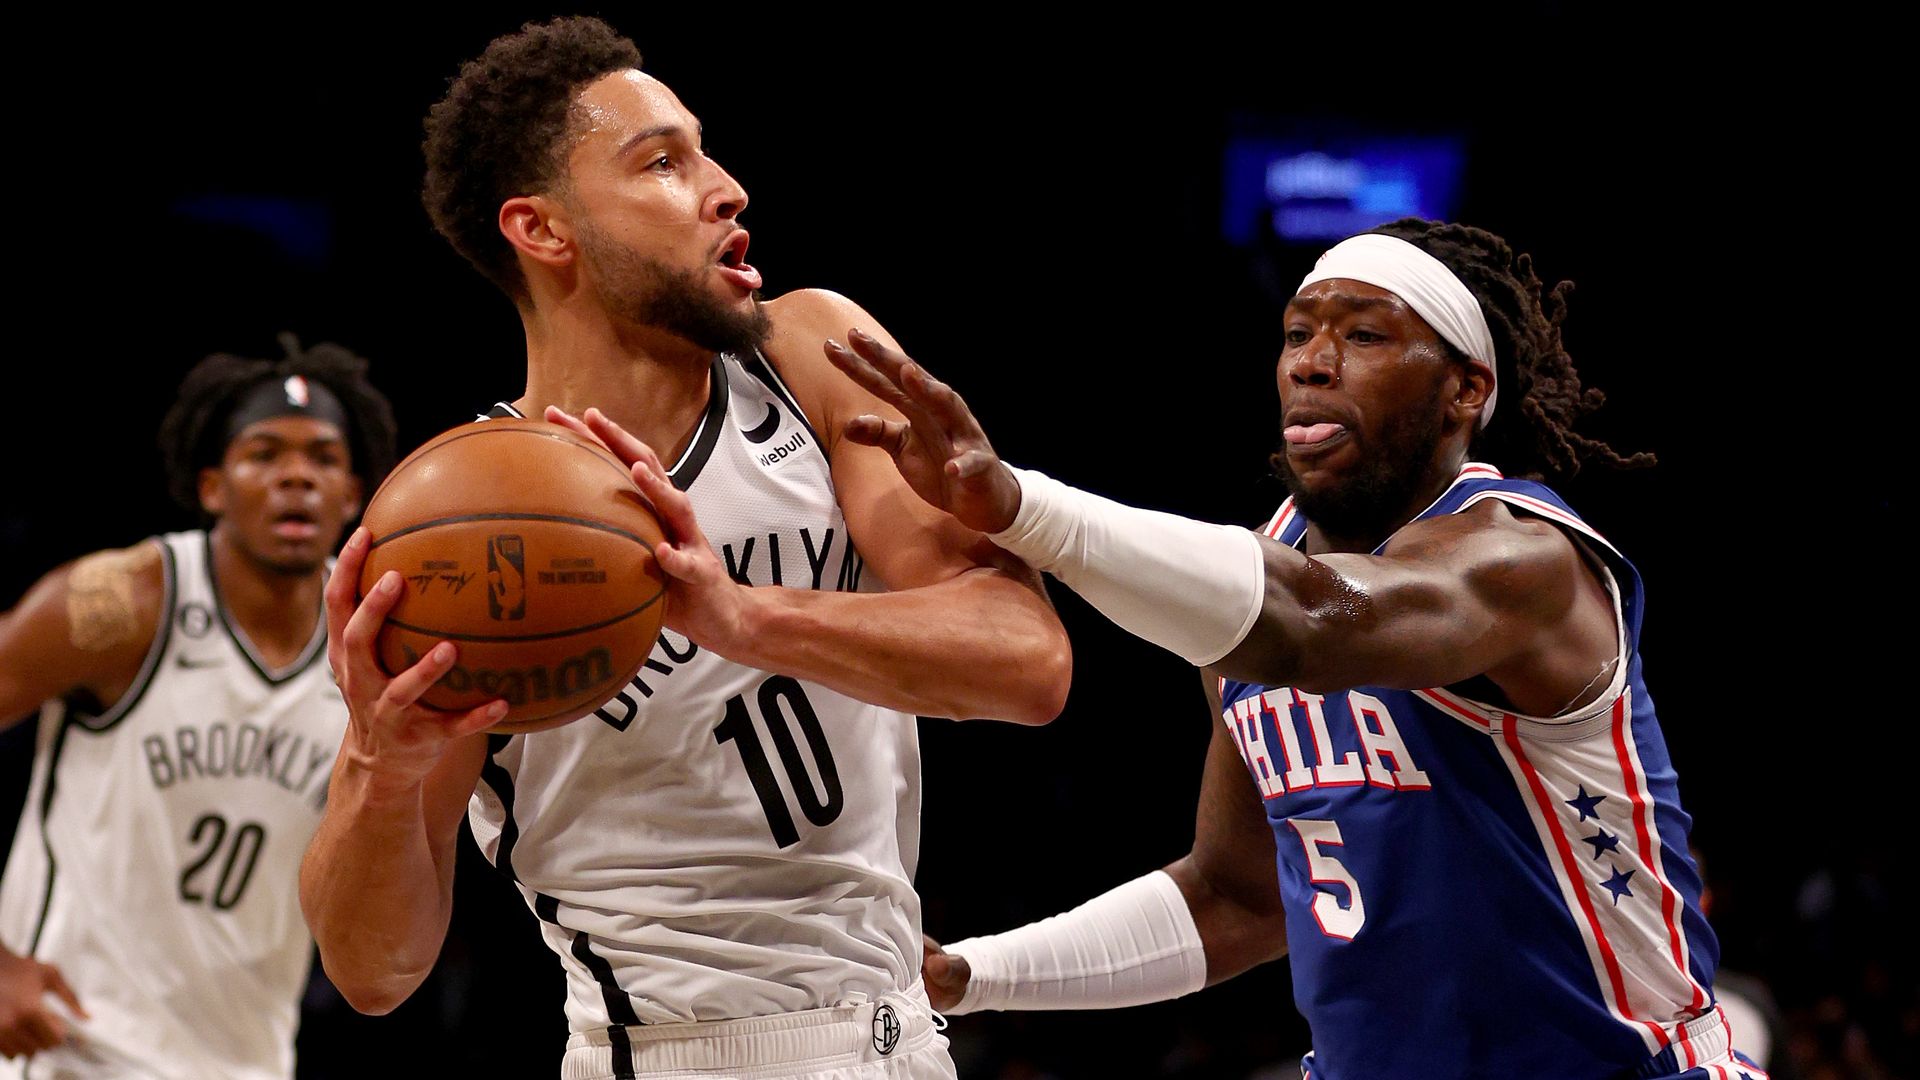 Brooklyn Nets guard Ben Simmons drives past the Sixers' Montrezl Harrell.